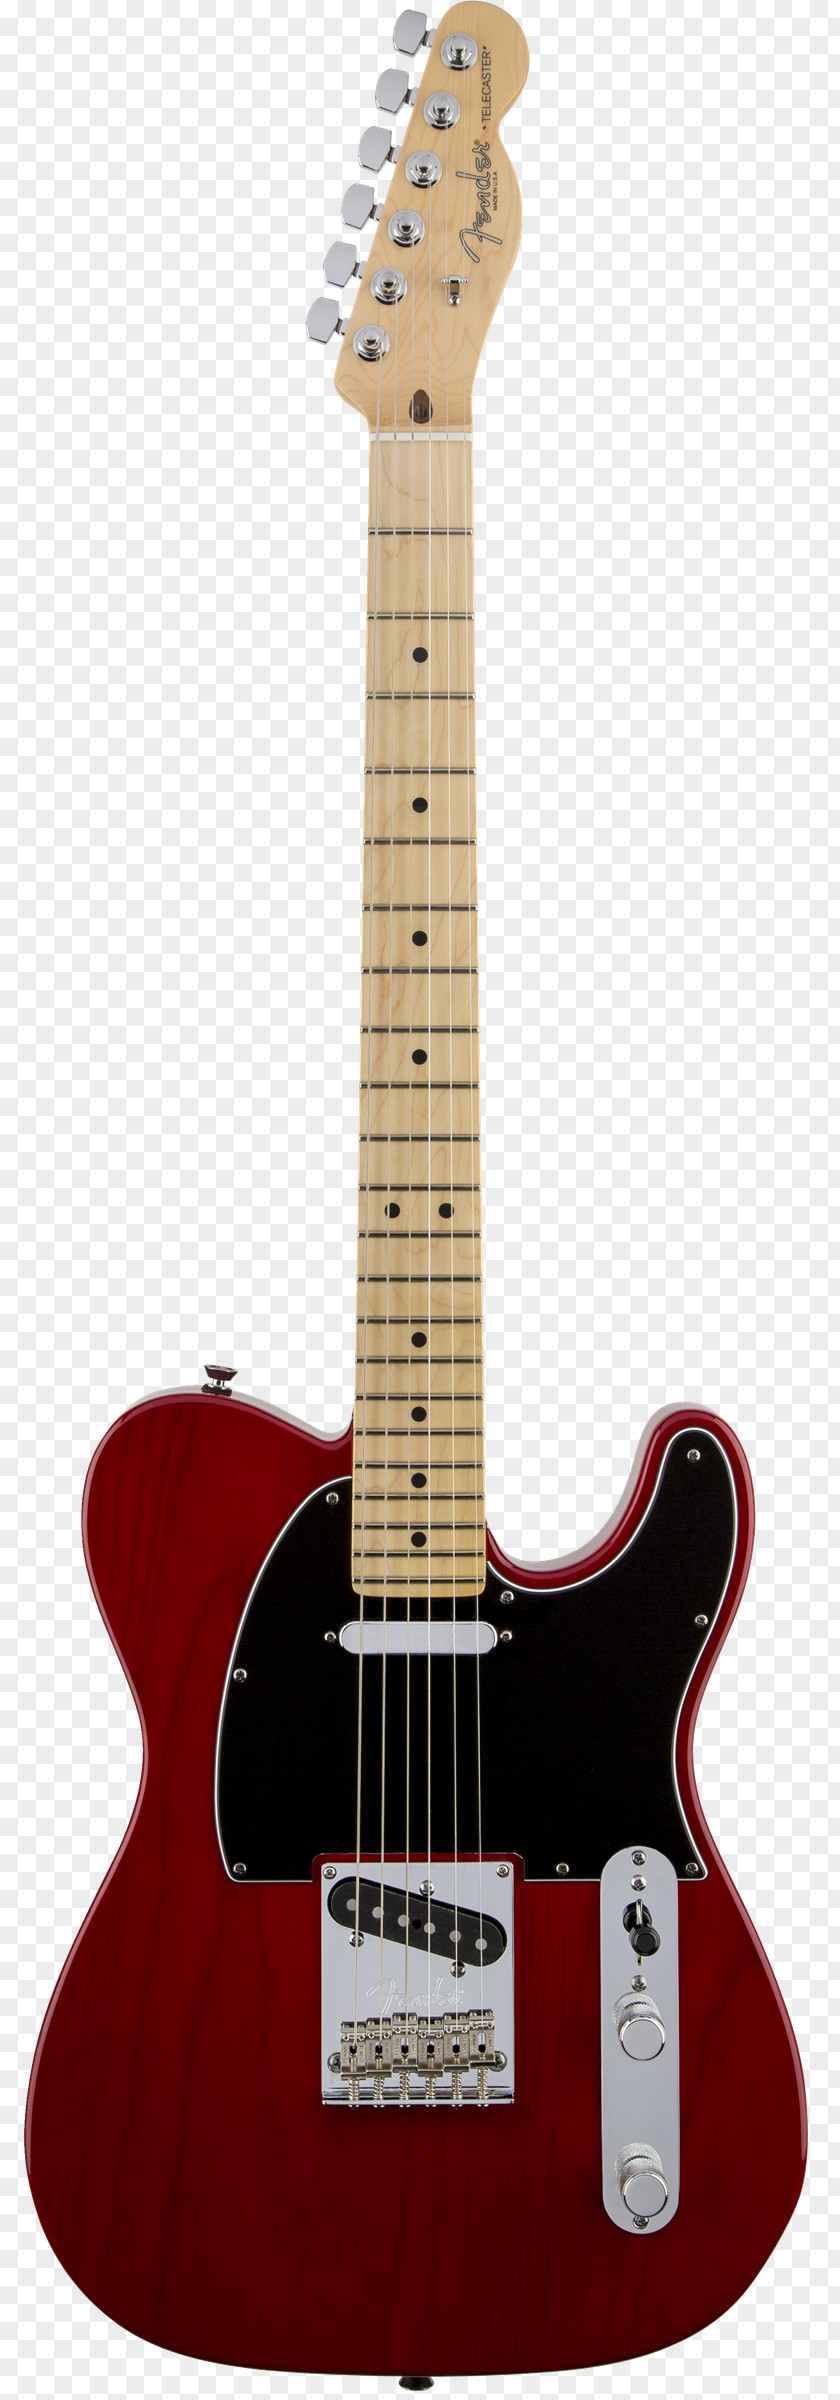 Guitar Fender Telecaster Musical Instruments Corporation Electric Stratocaster PNG